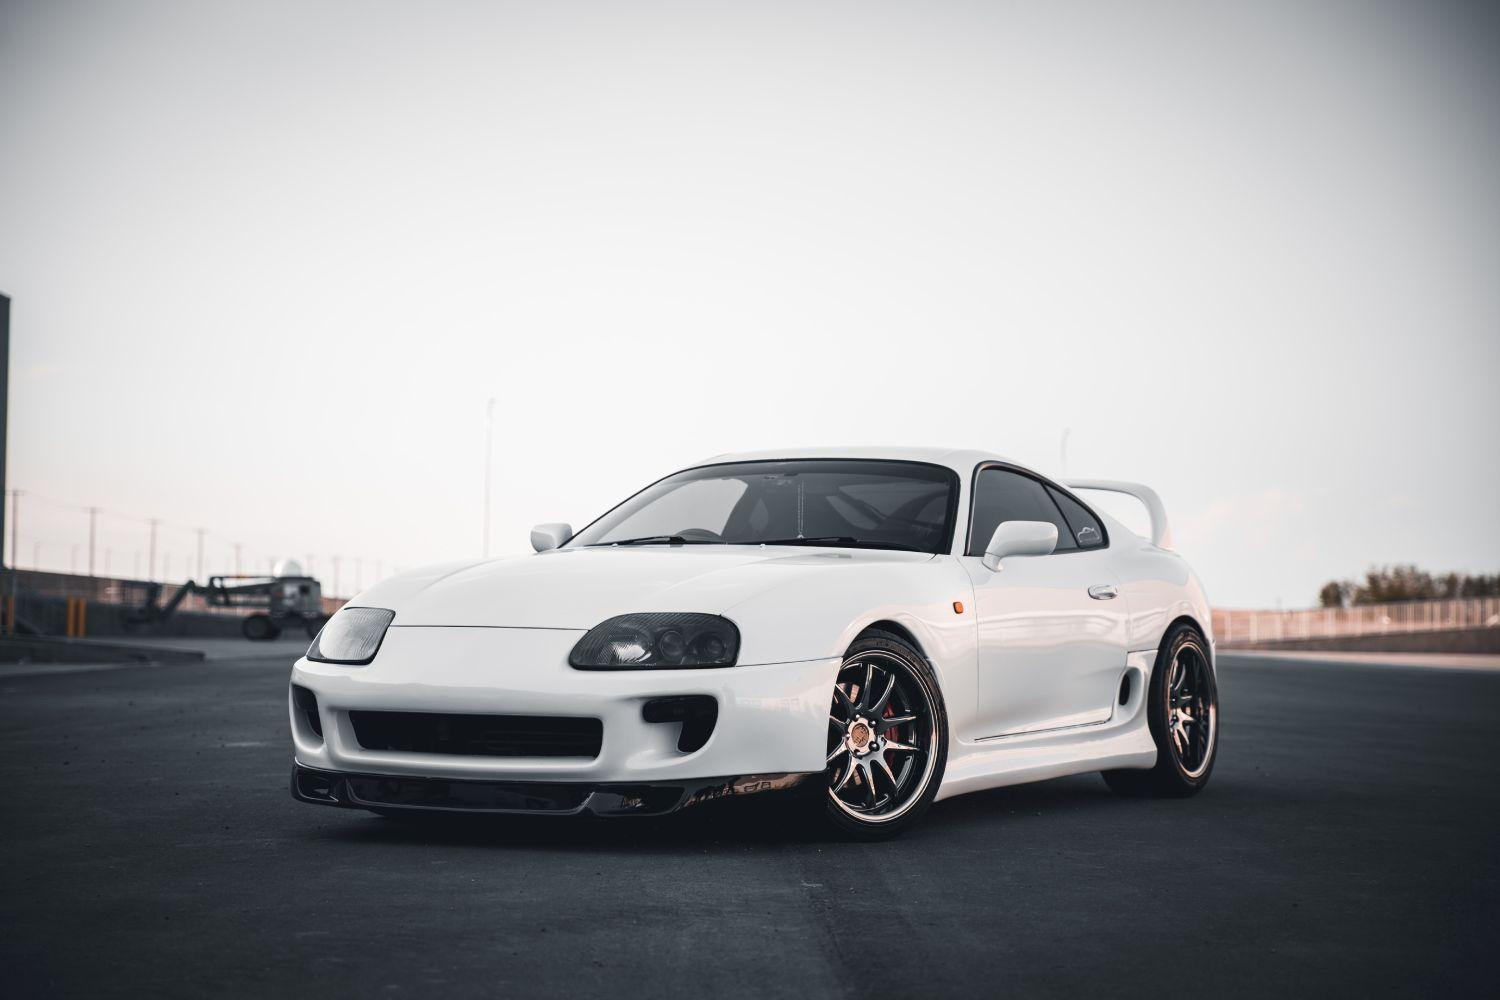 The Toyota Supra certainly looks like it’s from the 90s, but buyers have found charm in the retro design.